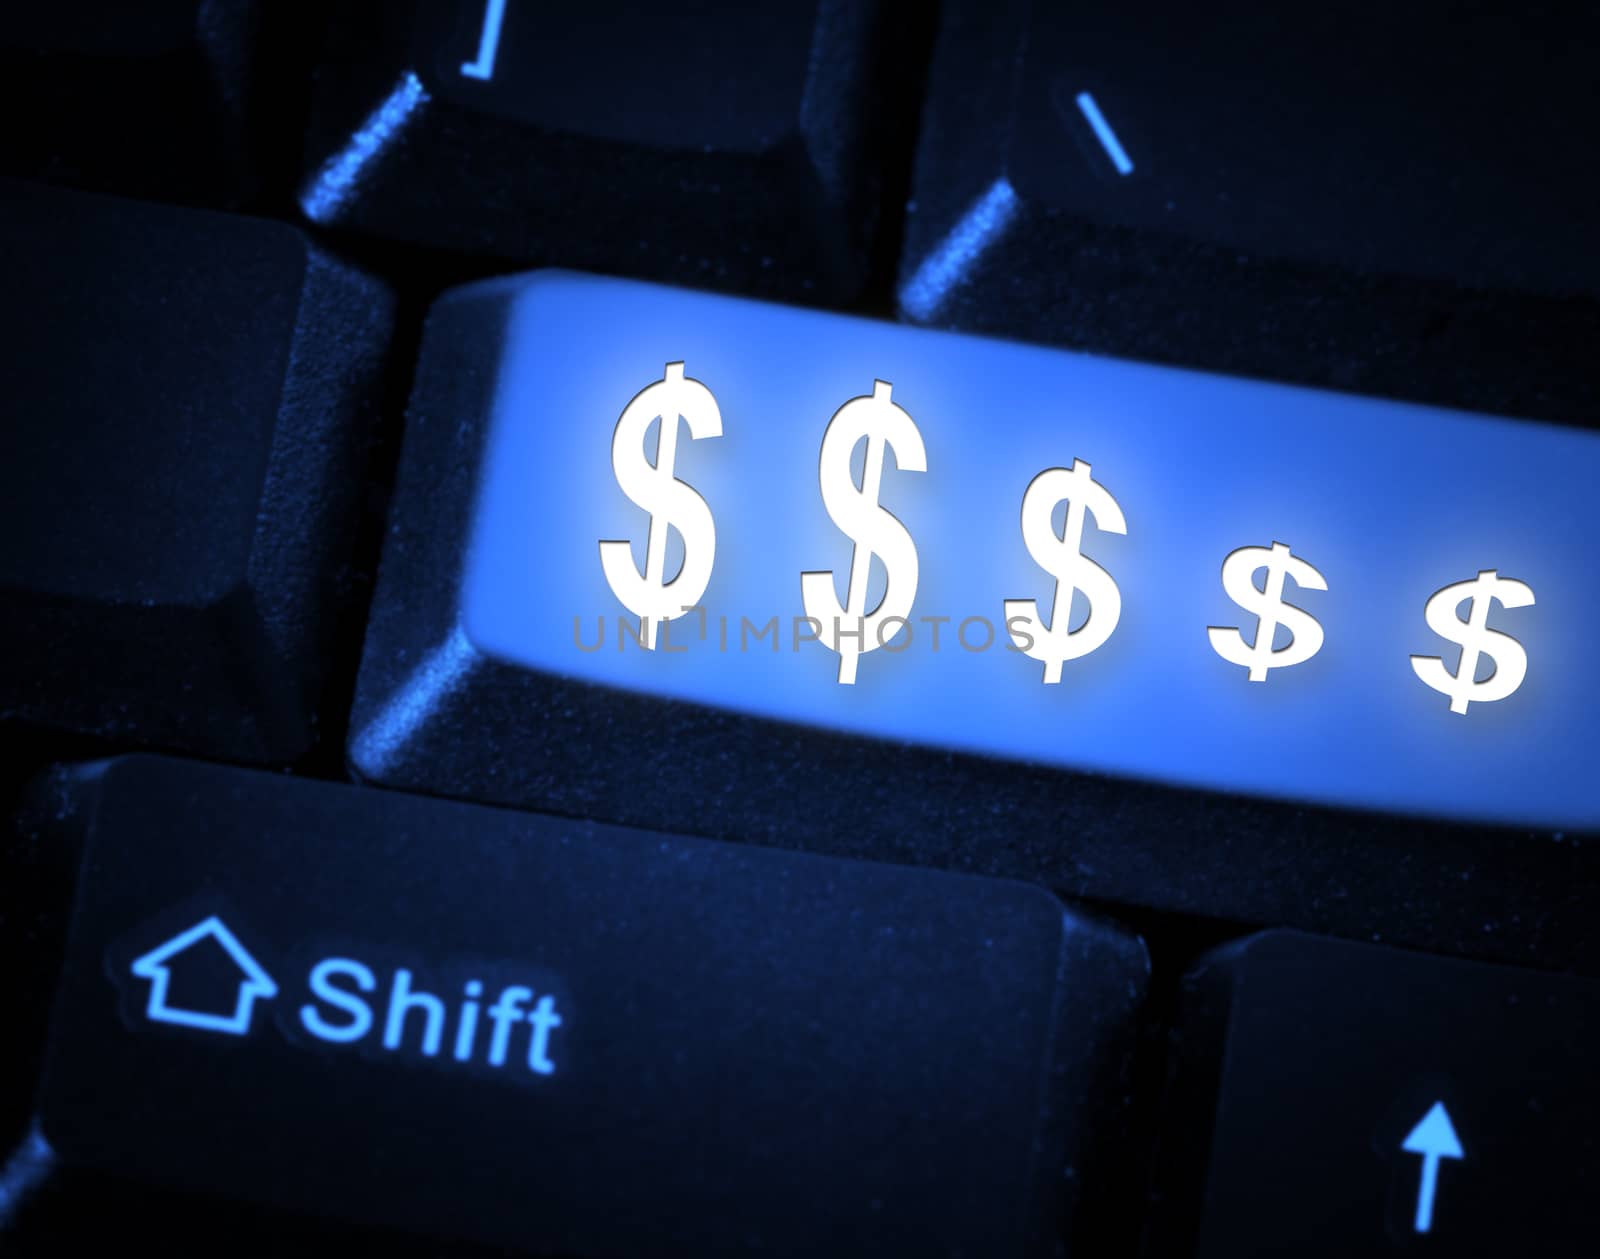 Close-up picture of a computer keyboard - blue key $$$